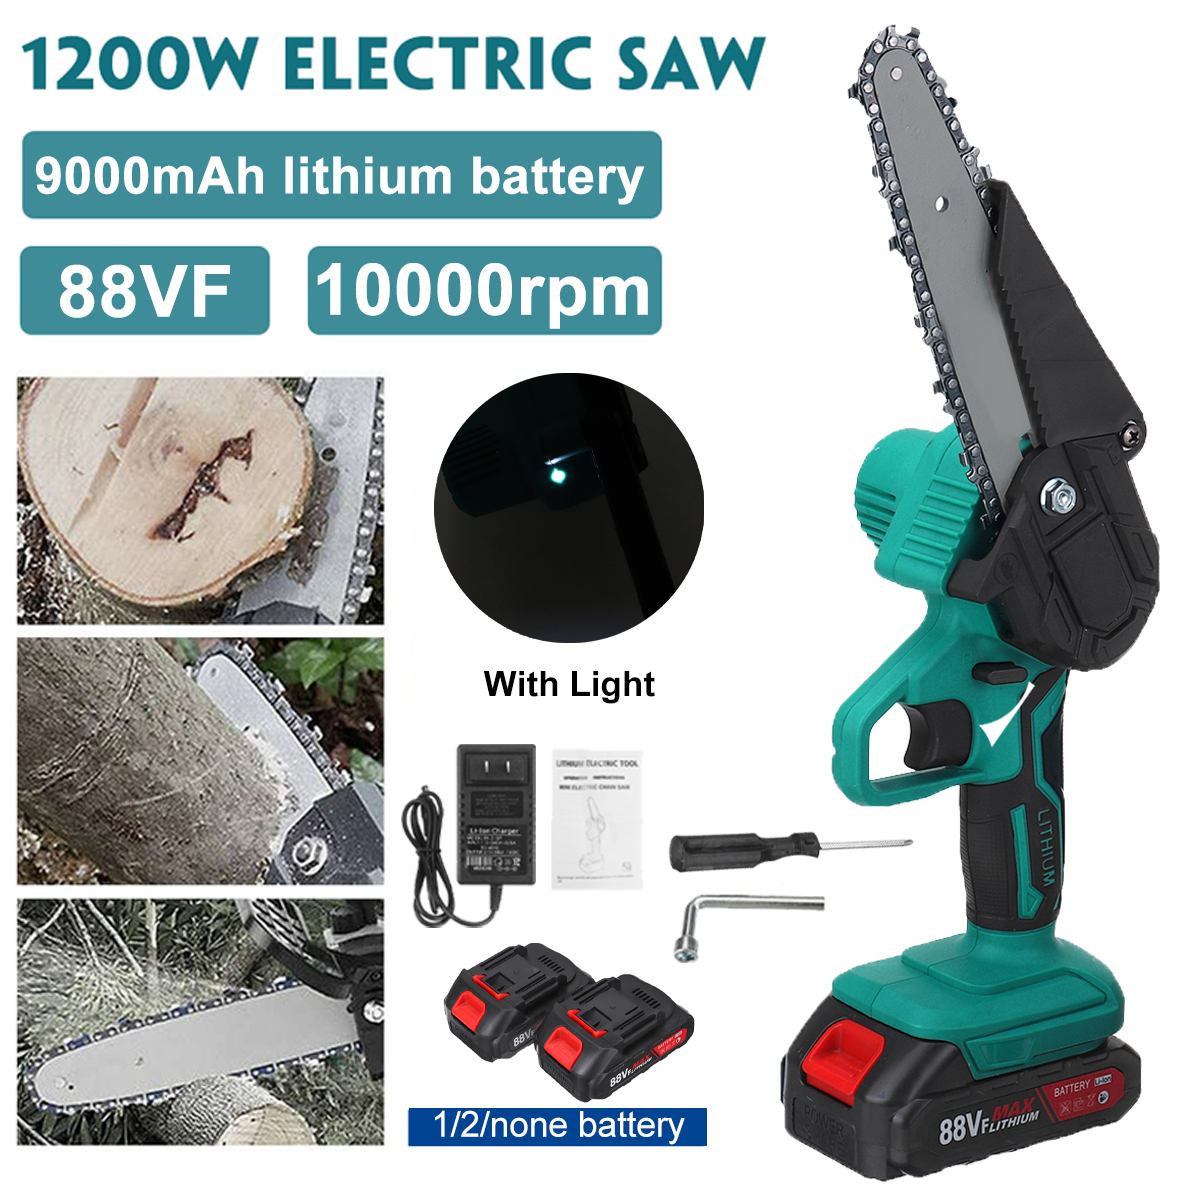 88VF-6-Inch-1200W-Electric-Chain-Saw-Pruning-Chainsaw-Cordless-Woodworking-Garden-Tree-Logging-Tool--1859896-1